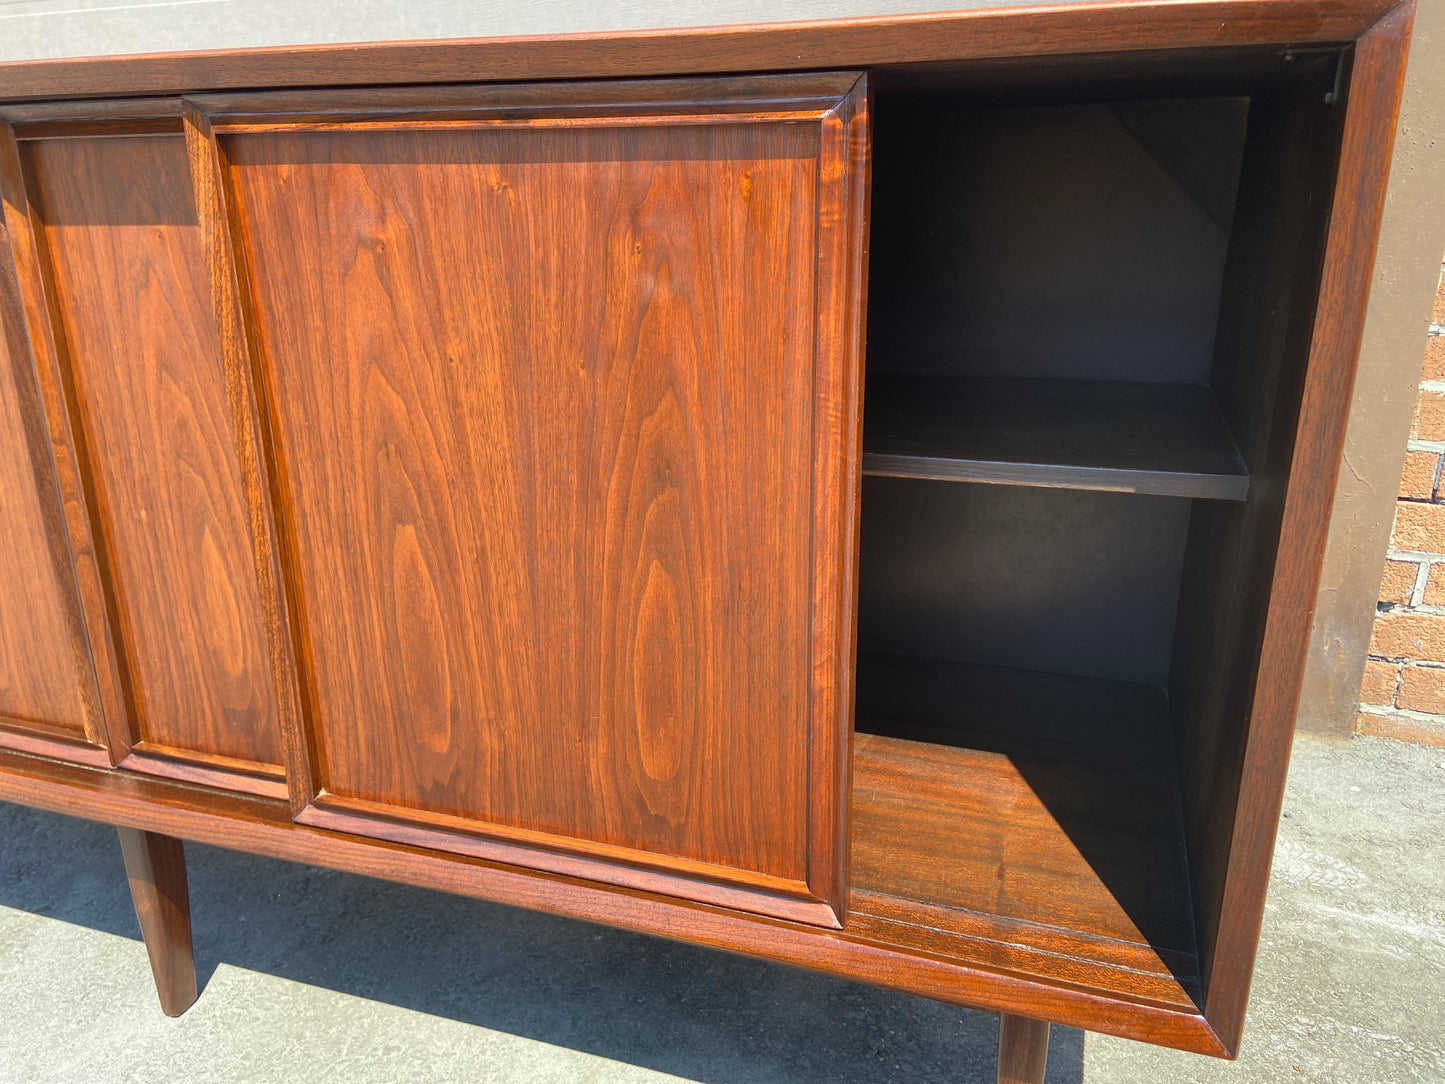 REFINISHED MCM Walnut Sideboard by Honderich 68", Perfect